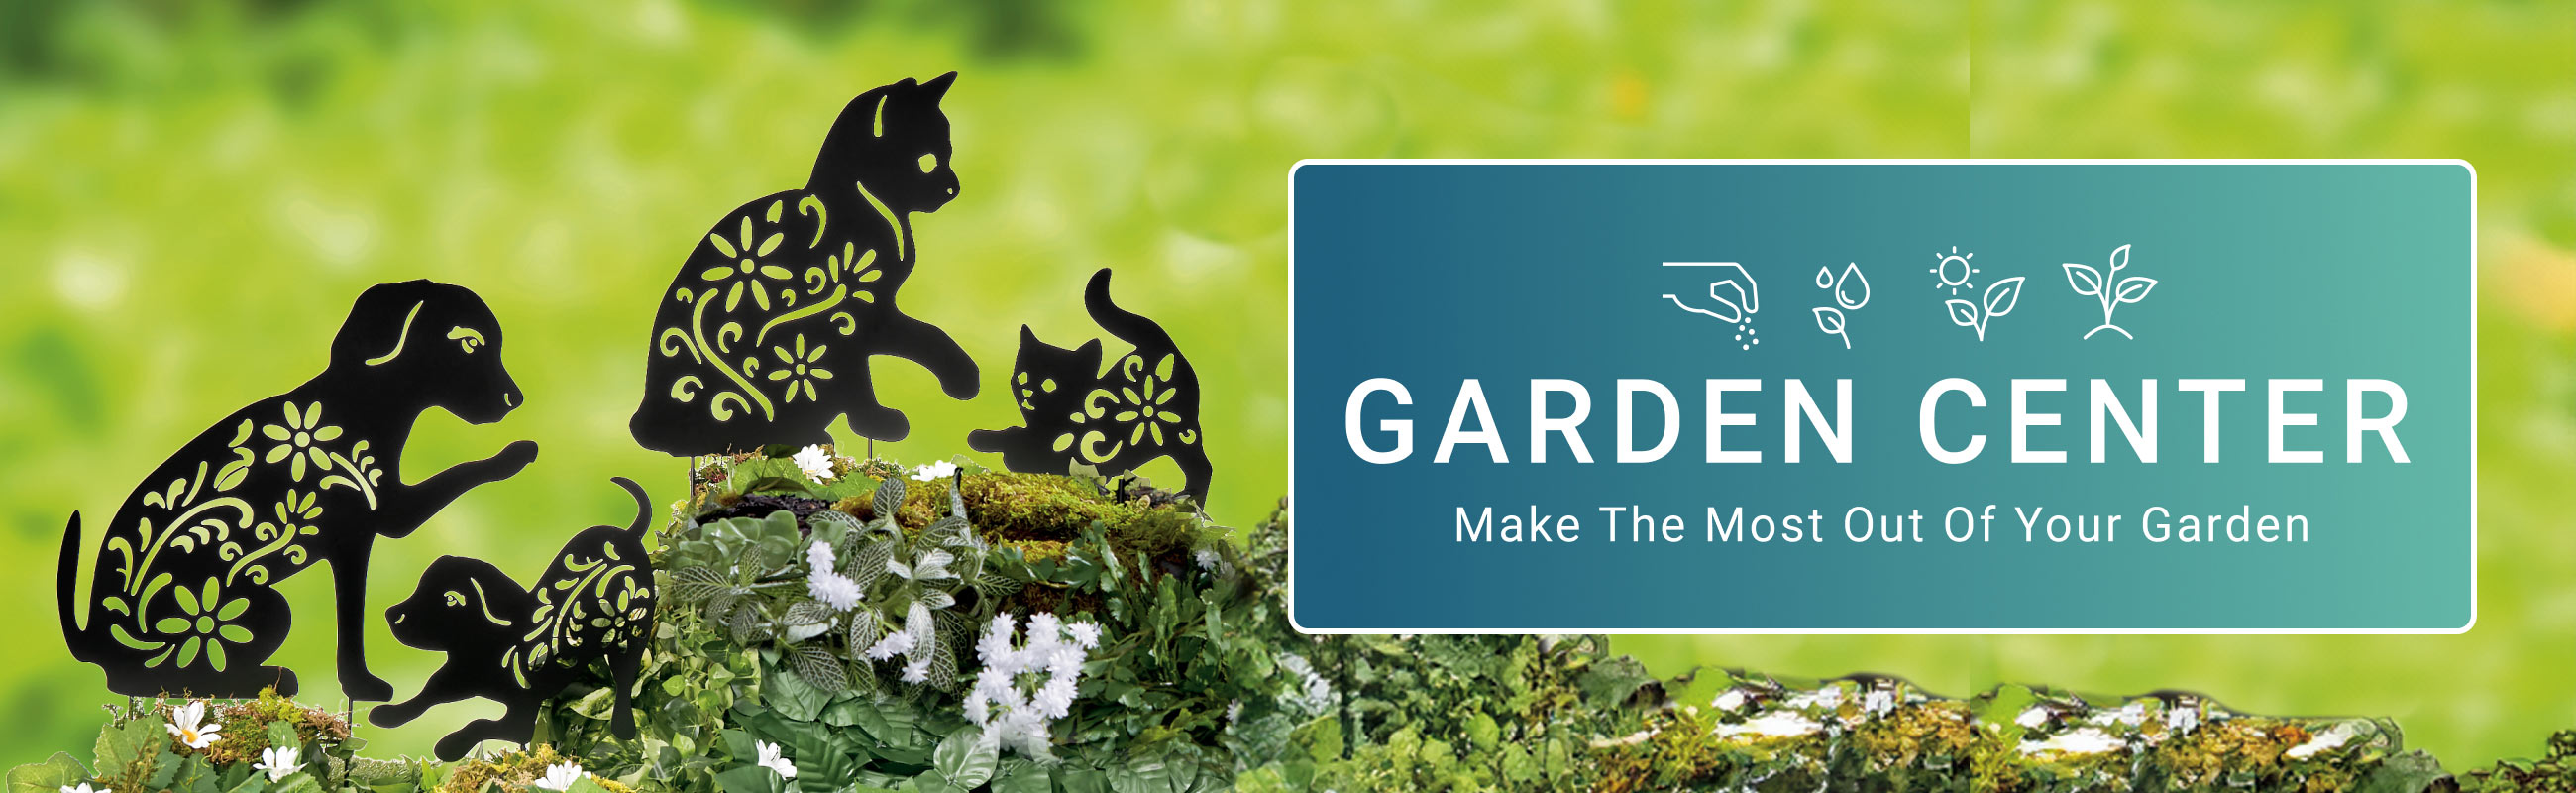 Make the most out of your garden - shop now